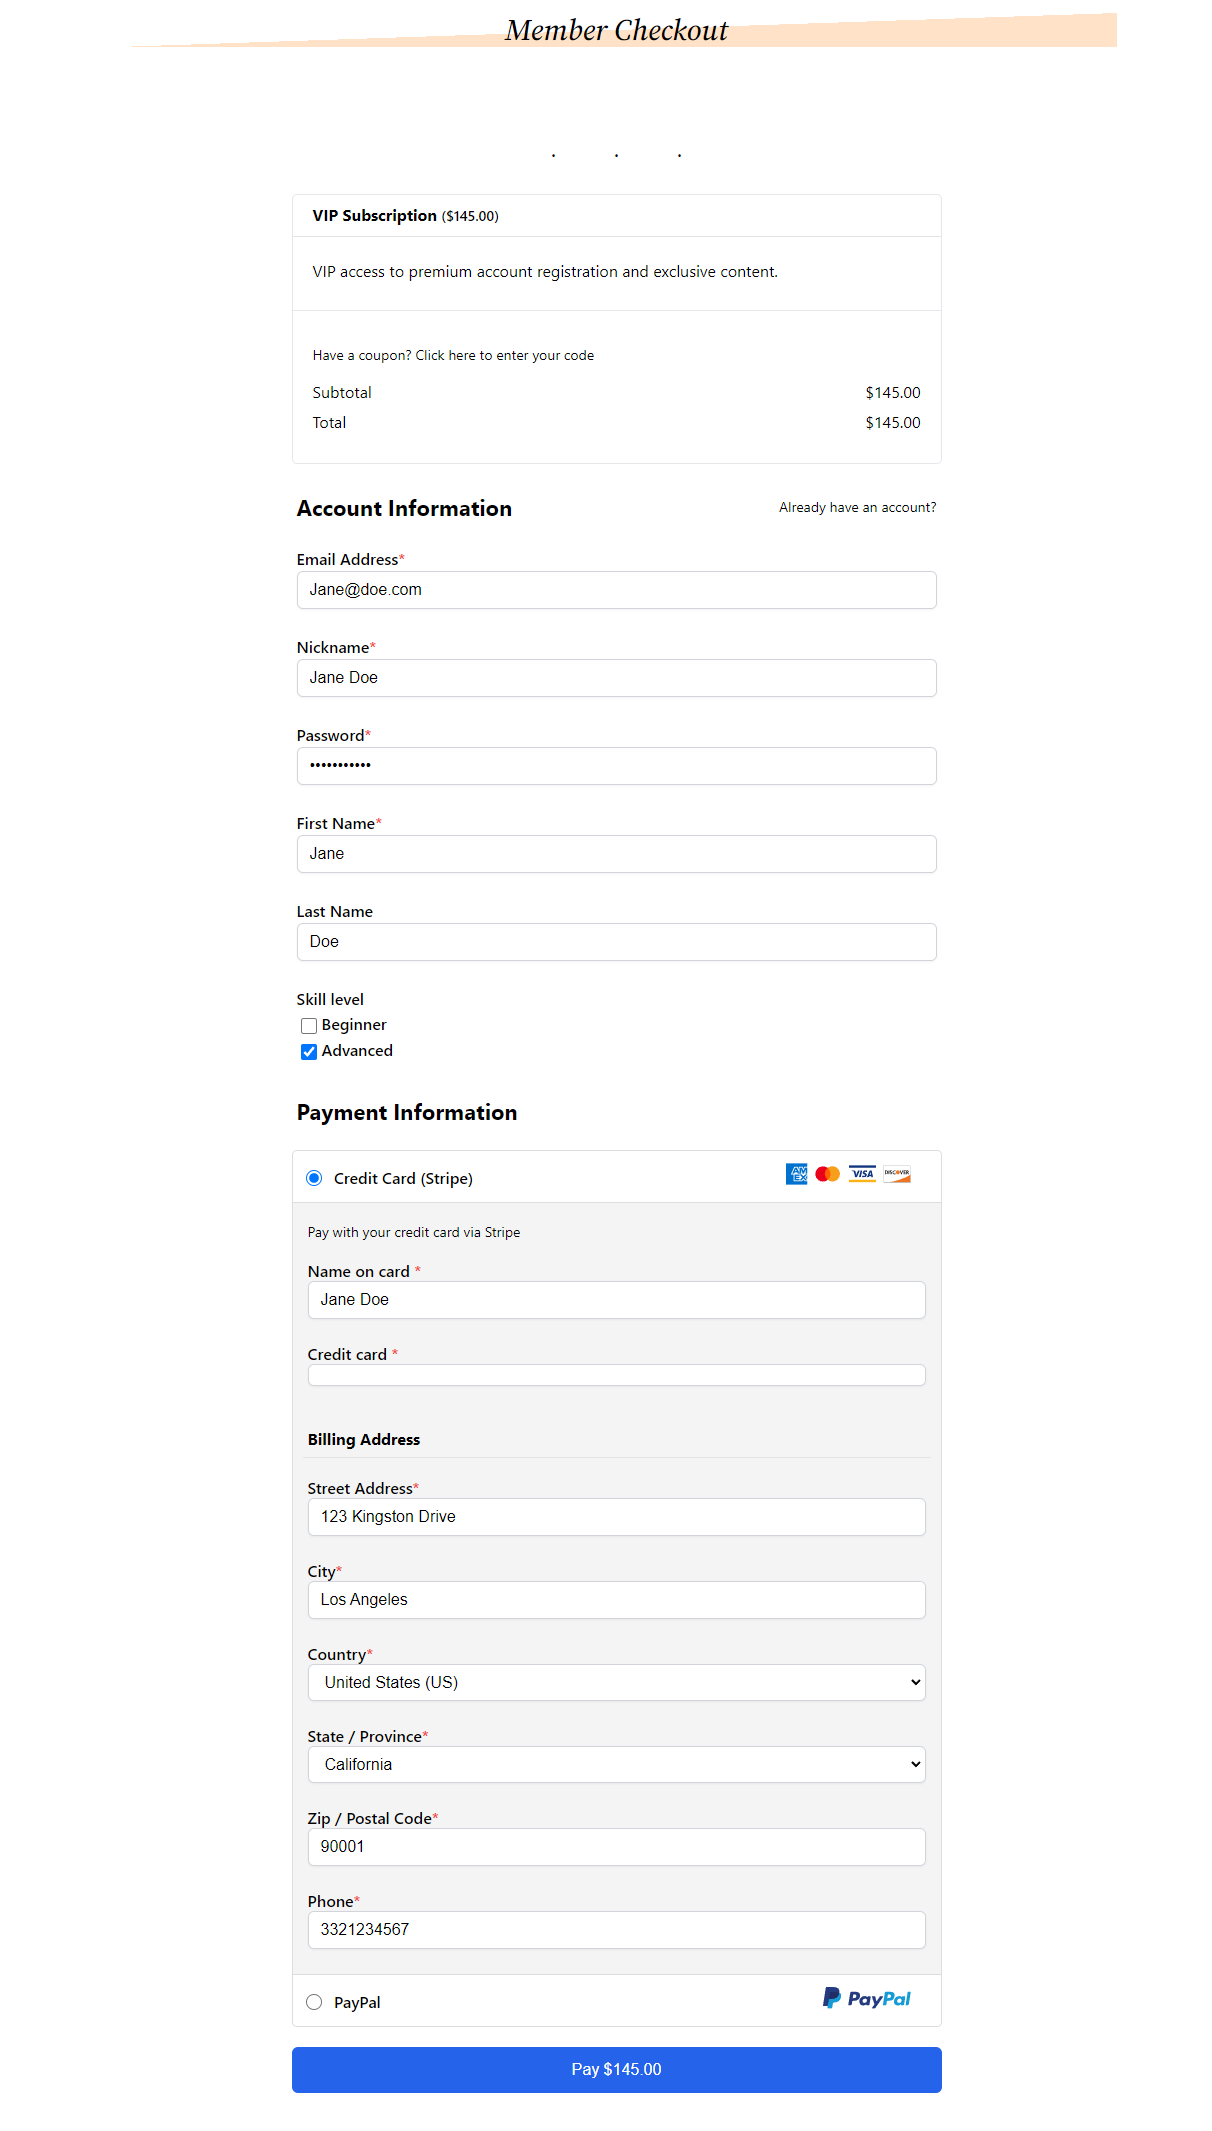 Charge users for premium account registration